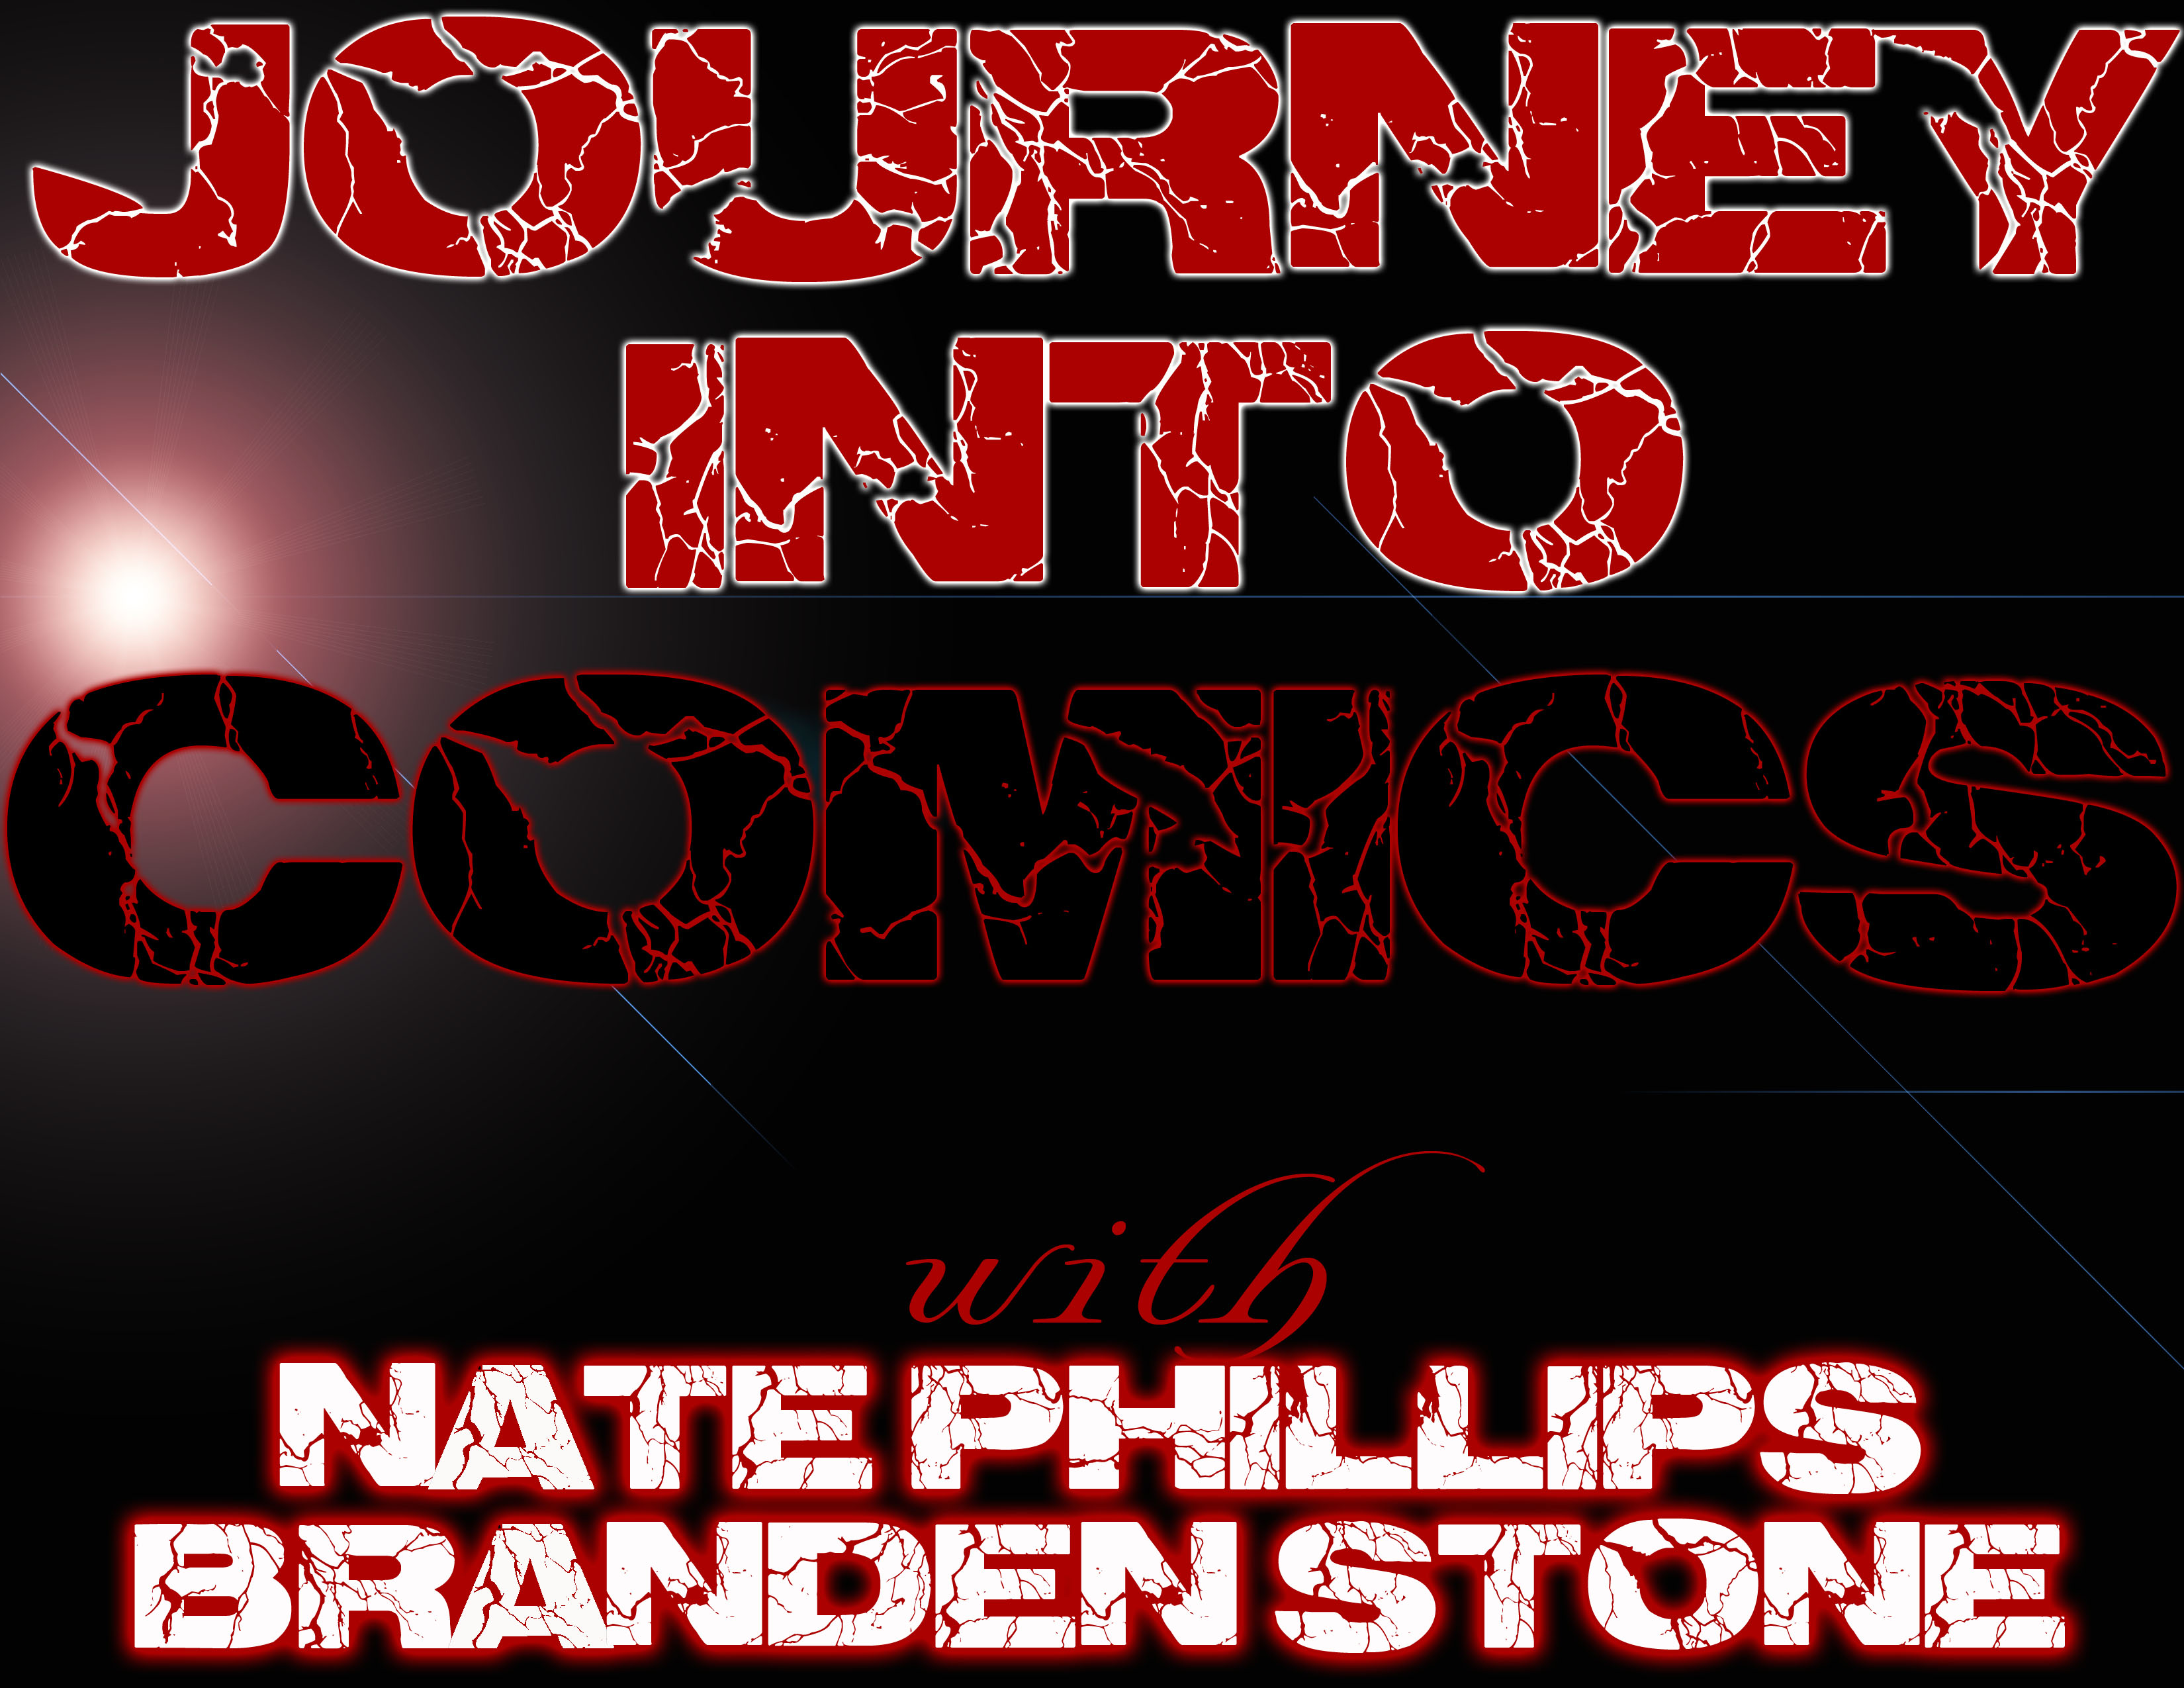 Journey Into Comics 037 - NateCast: First Appearance of Shuddy Boy